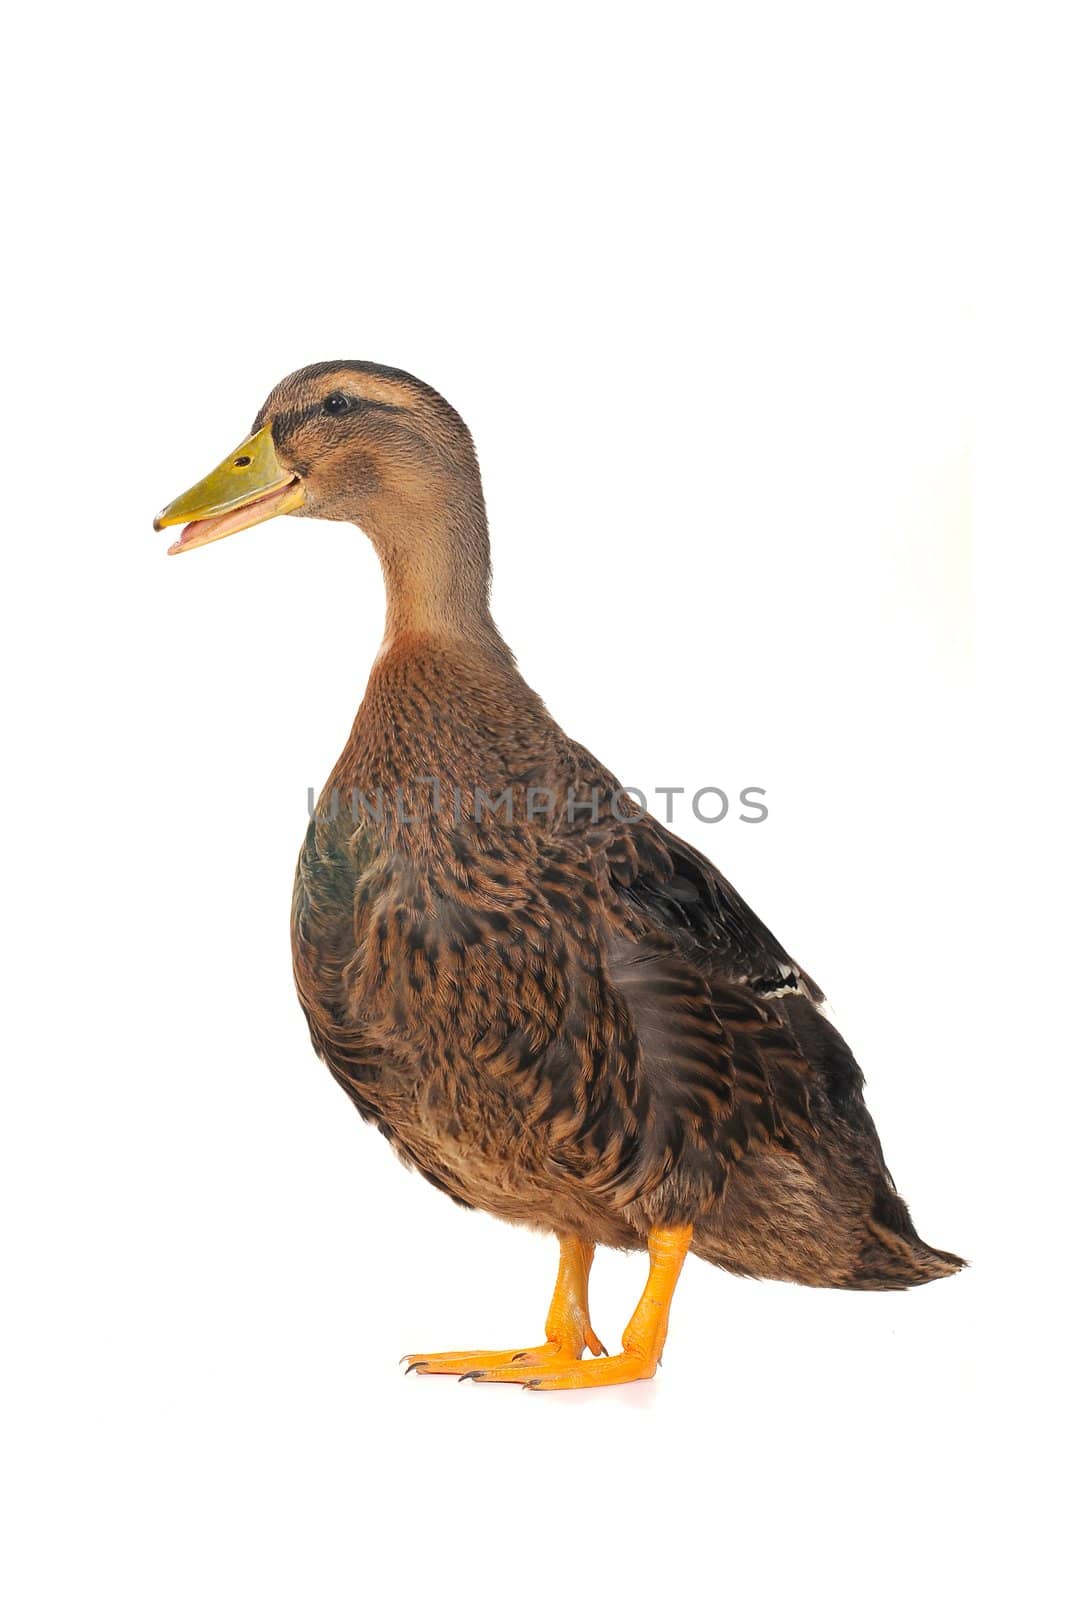  duck on a white background                           